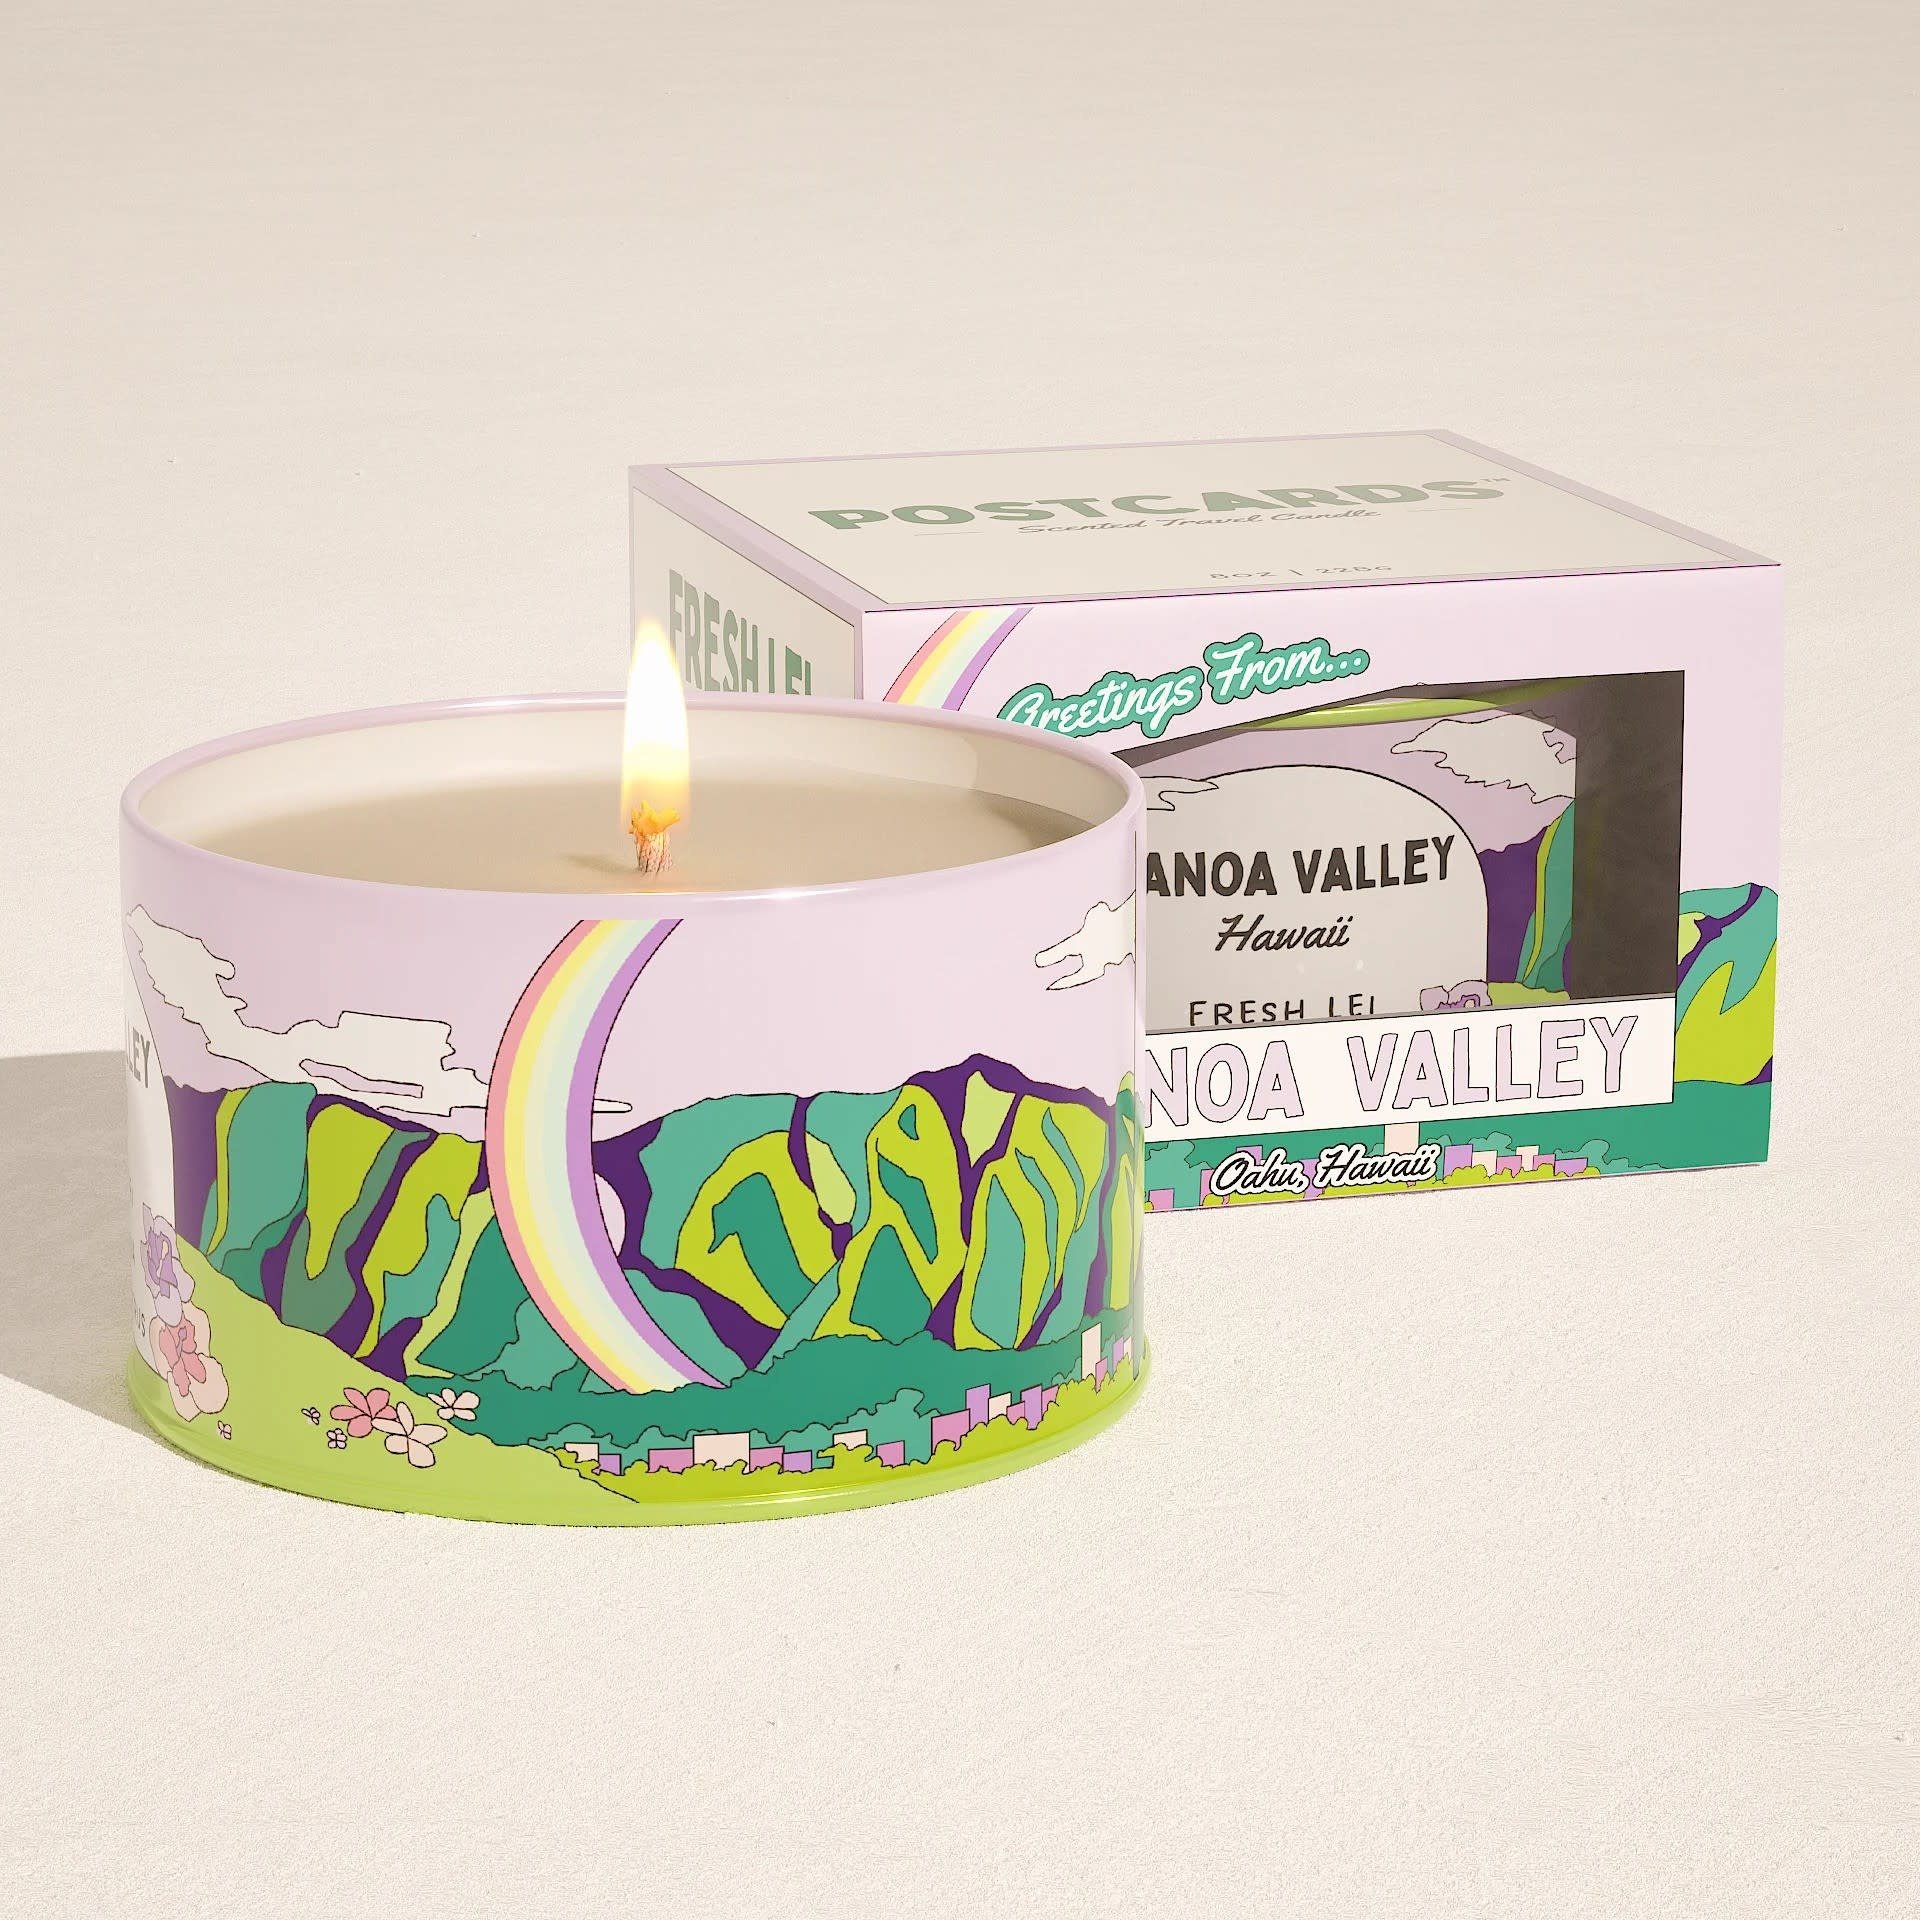 It's Paradise MANOA VALLEY CANDLE 8 oz